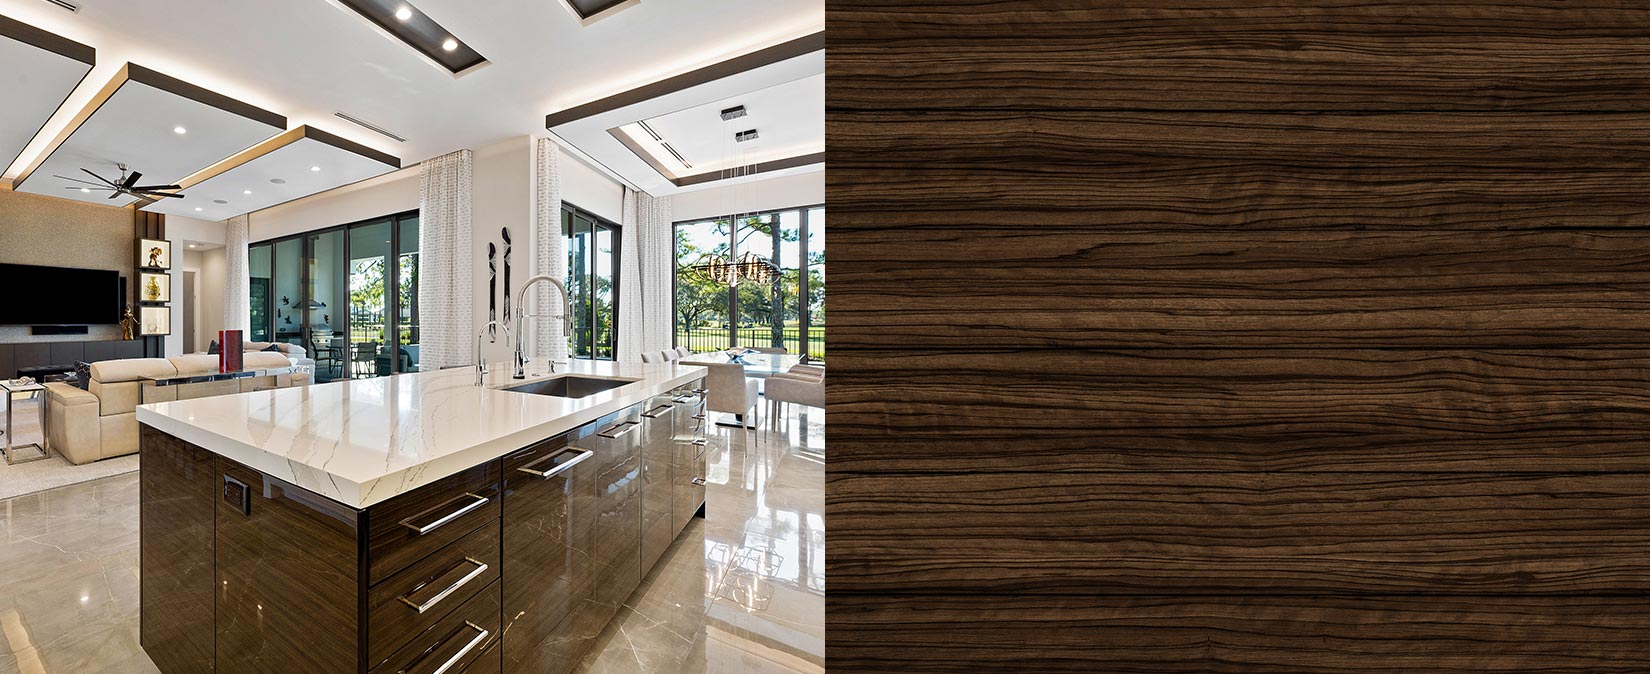 Custom Designed Kitchen & Bath Cabinetry in South Florida